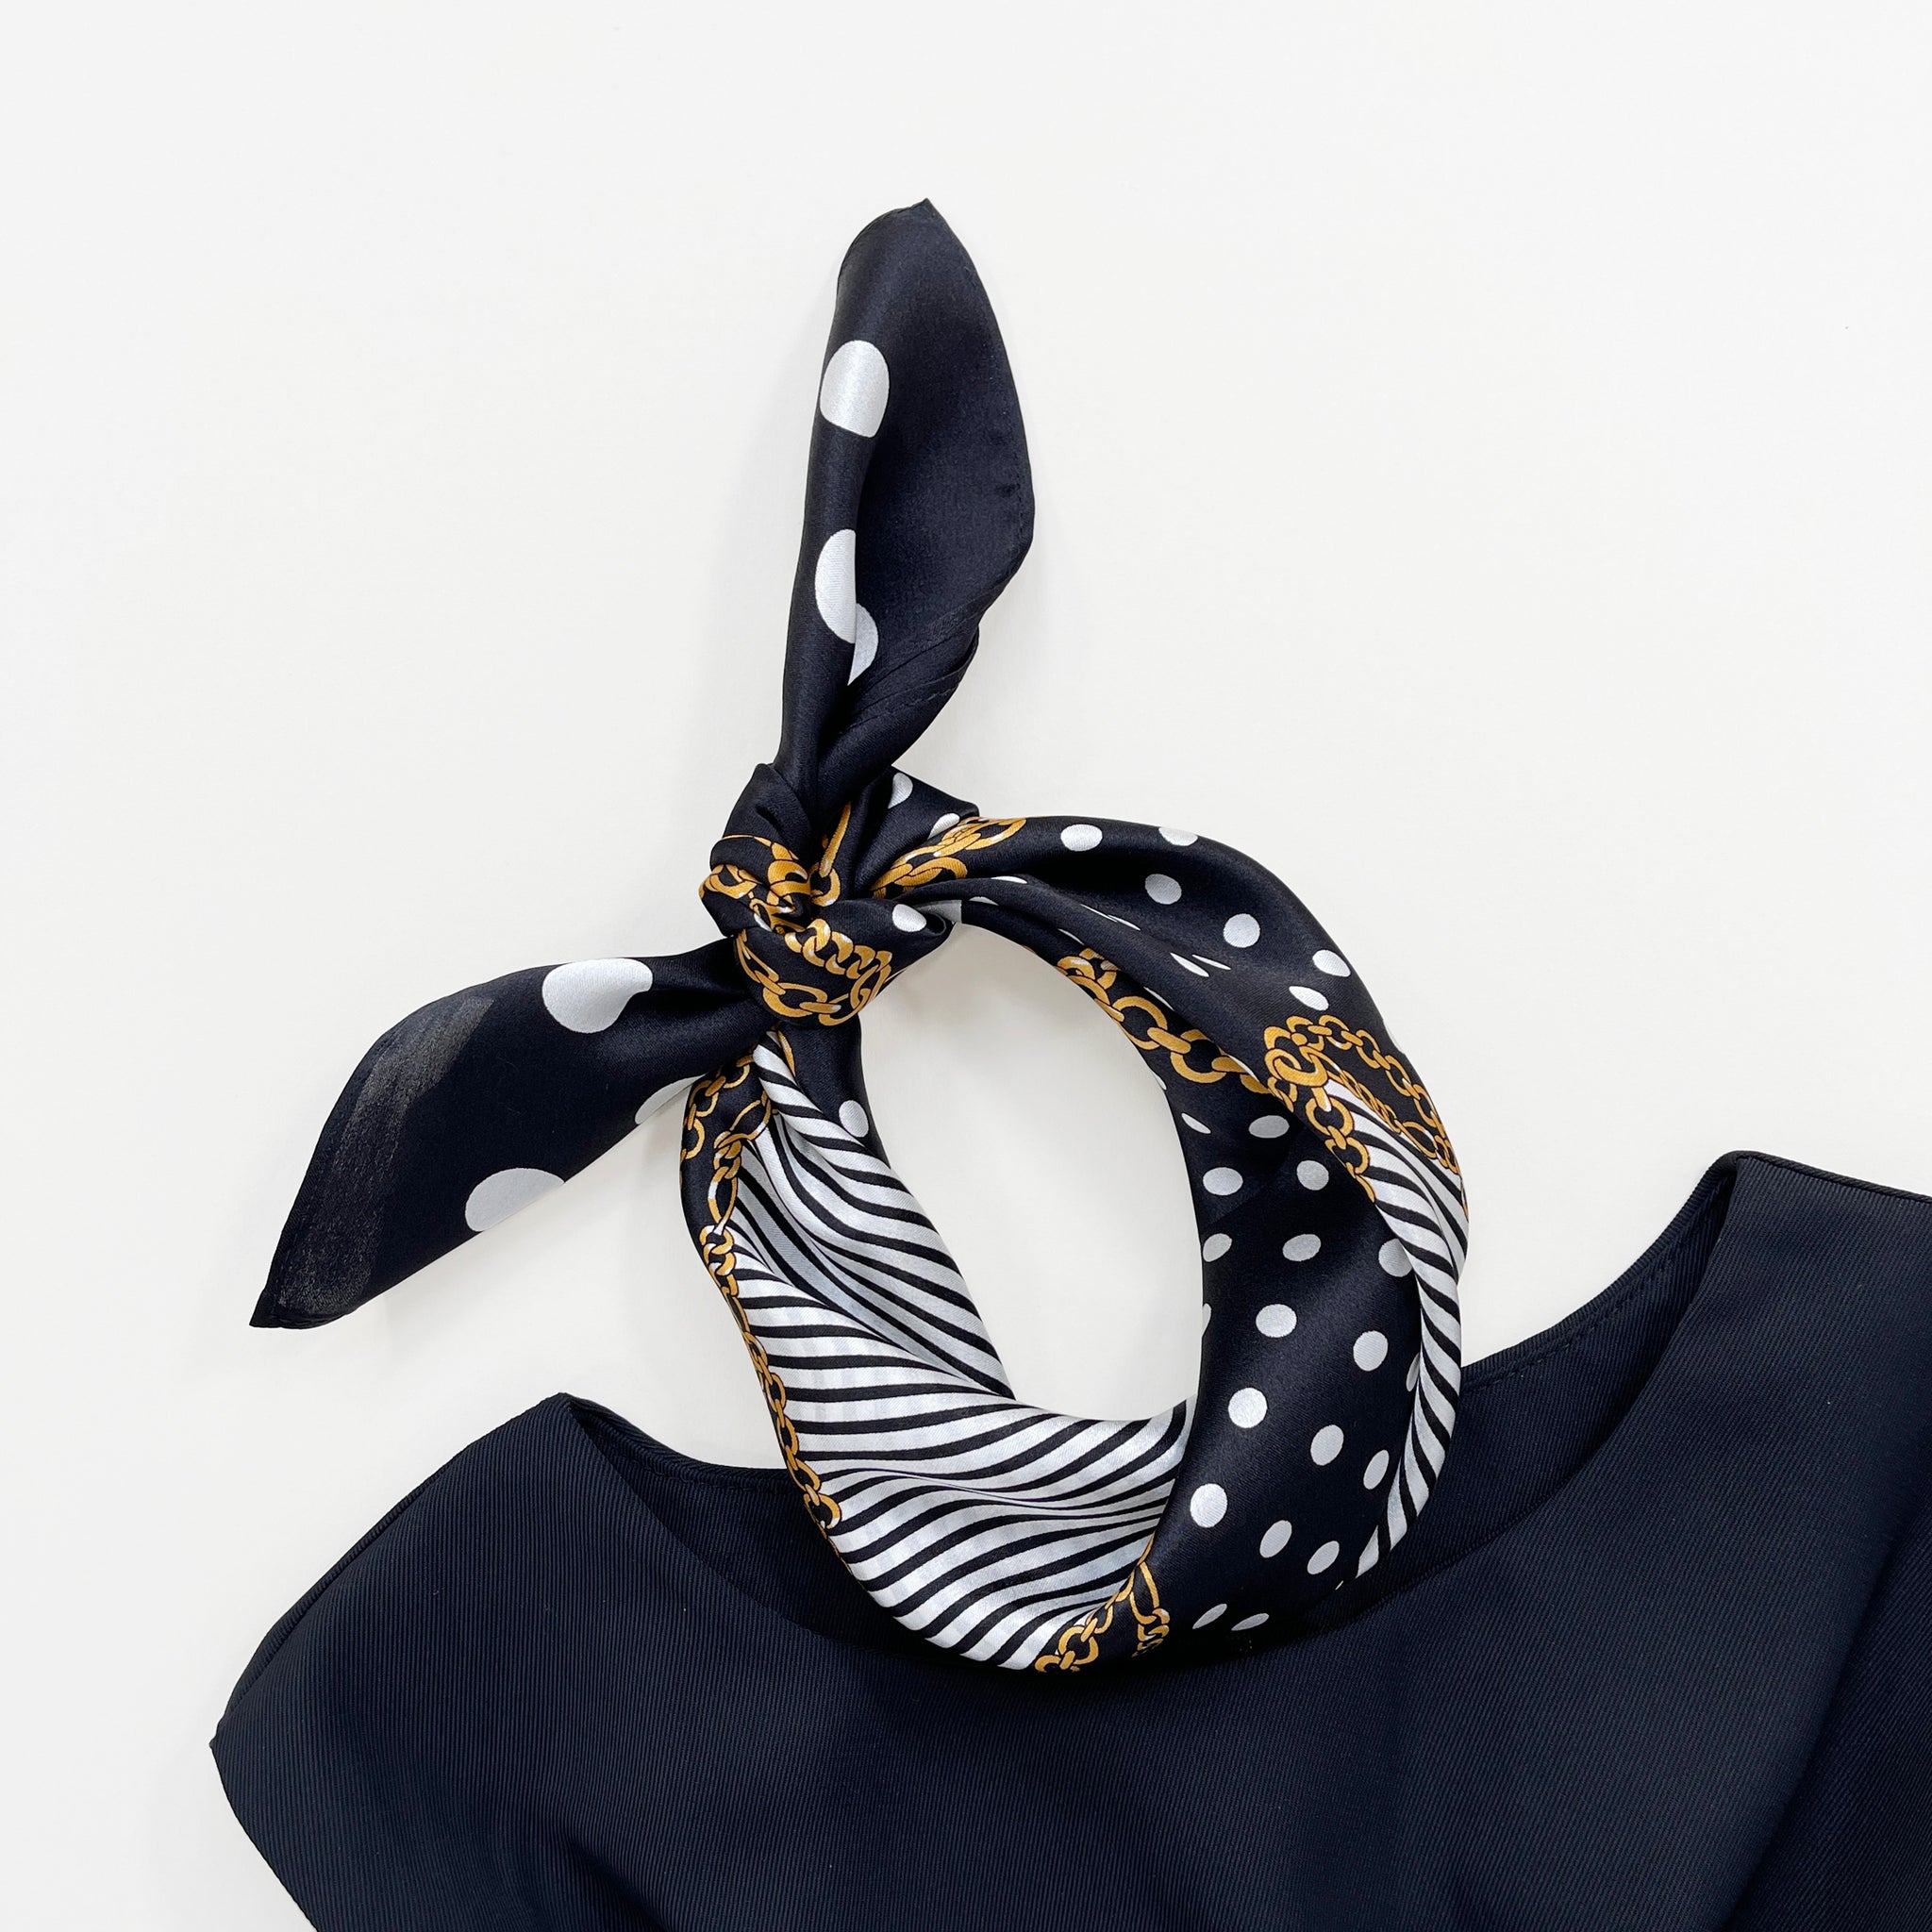 a small square silk scarf for women featuring polka dot and stripe print in black and white palette knotted as a headscarf paired with a sleeveless black dress